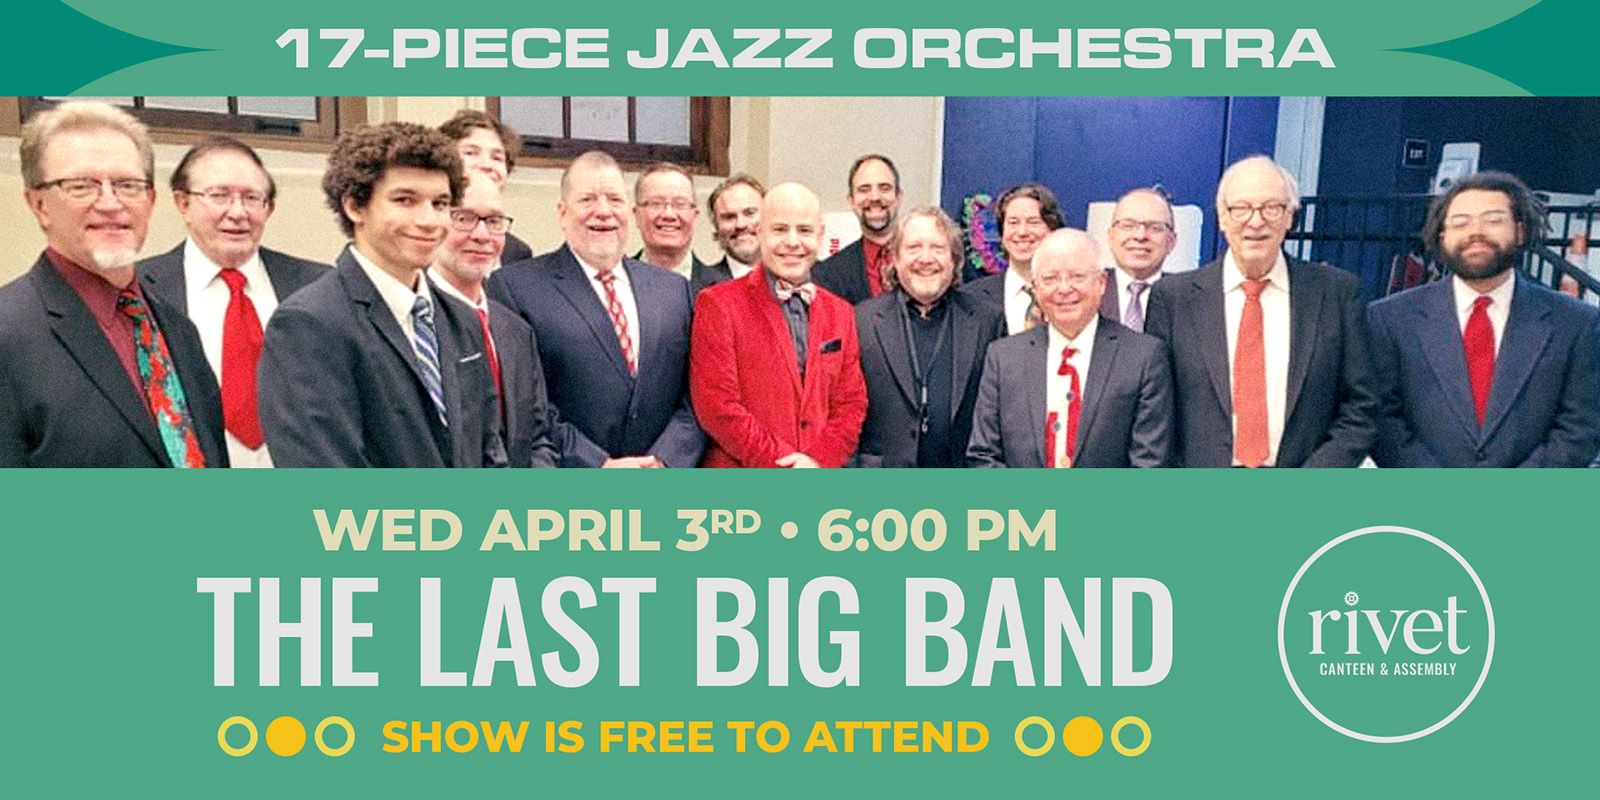 The Last Big Band returns to Rivet: Canteen & Assembly with a fantastic FREE show! Don't miss this chance to experience their incredible music on Wednesday, April 3rd. Doors at 6PM. All ages are welcome. Join us!